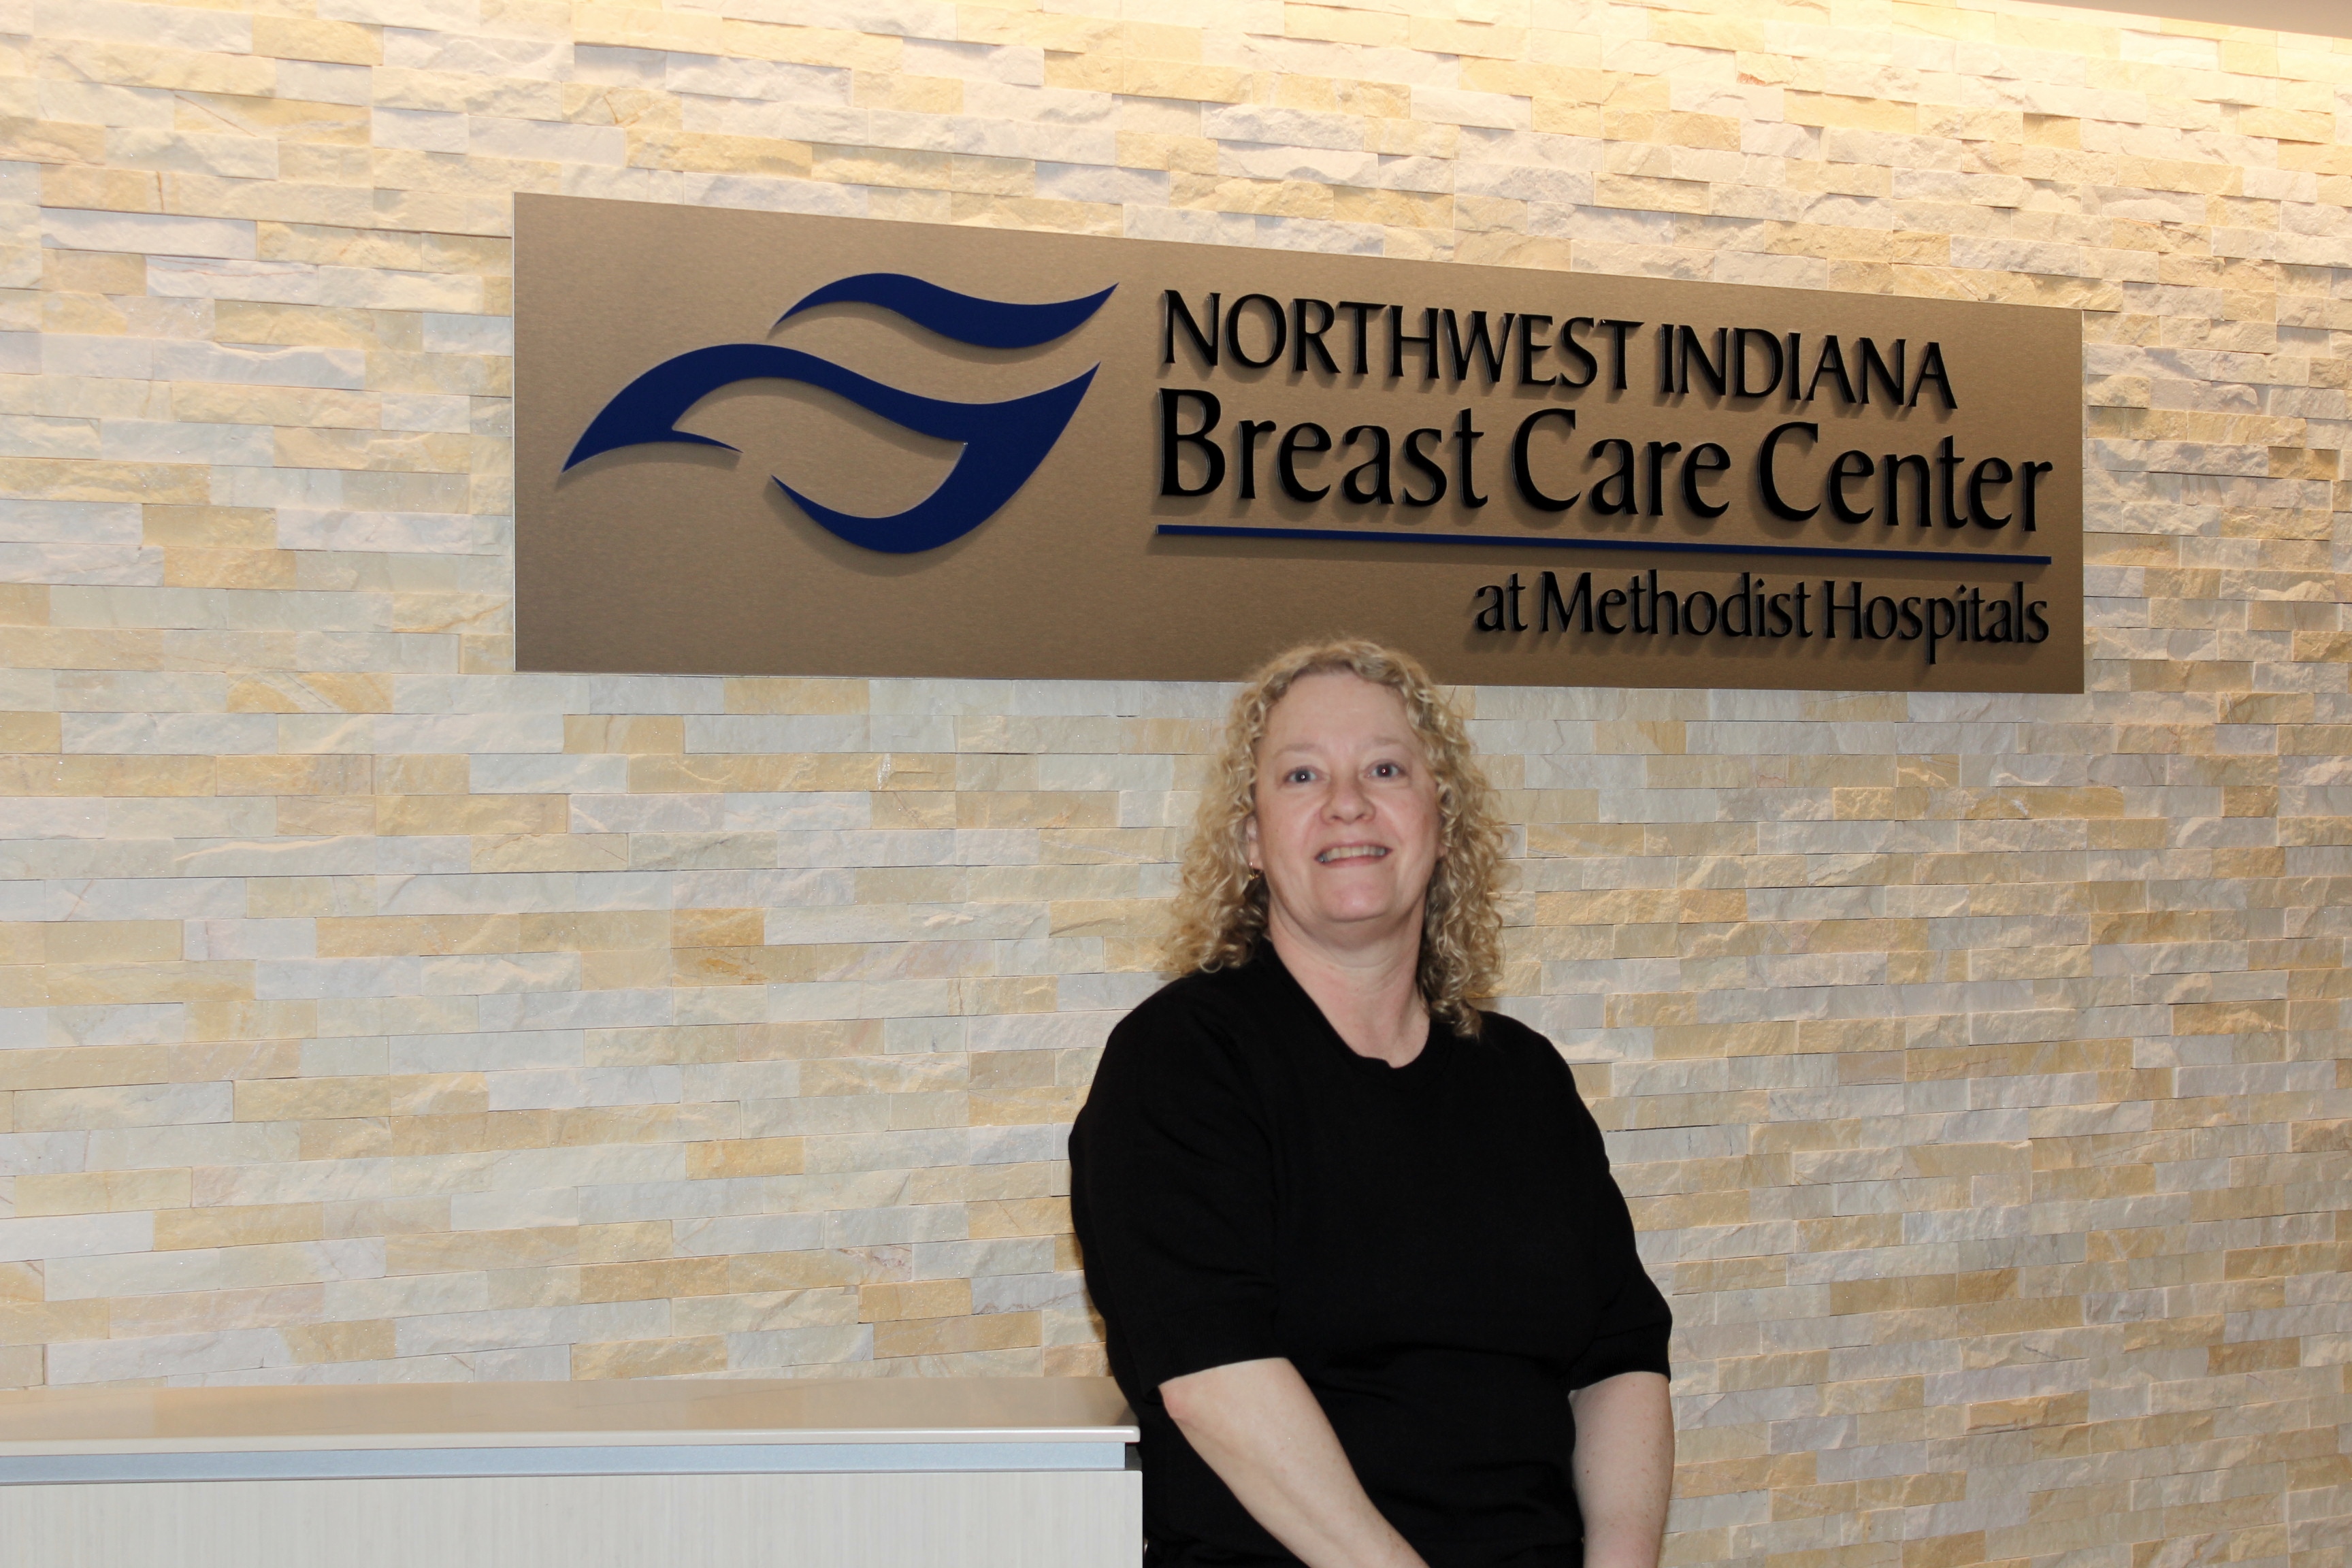 Pam Daly Loves the Innovative Nature of Northwest Indiana Breast Care Center at Methodist Hospitals